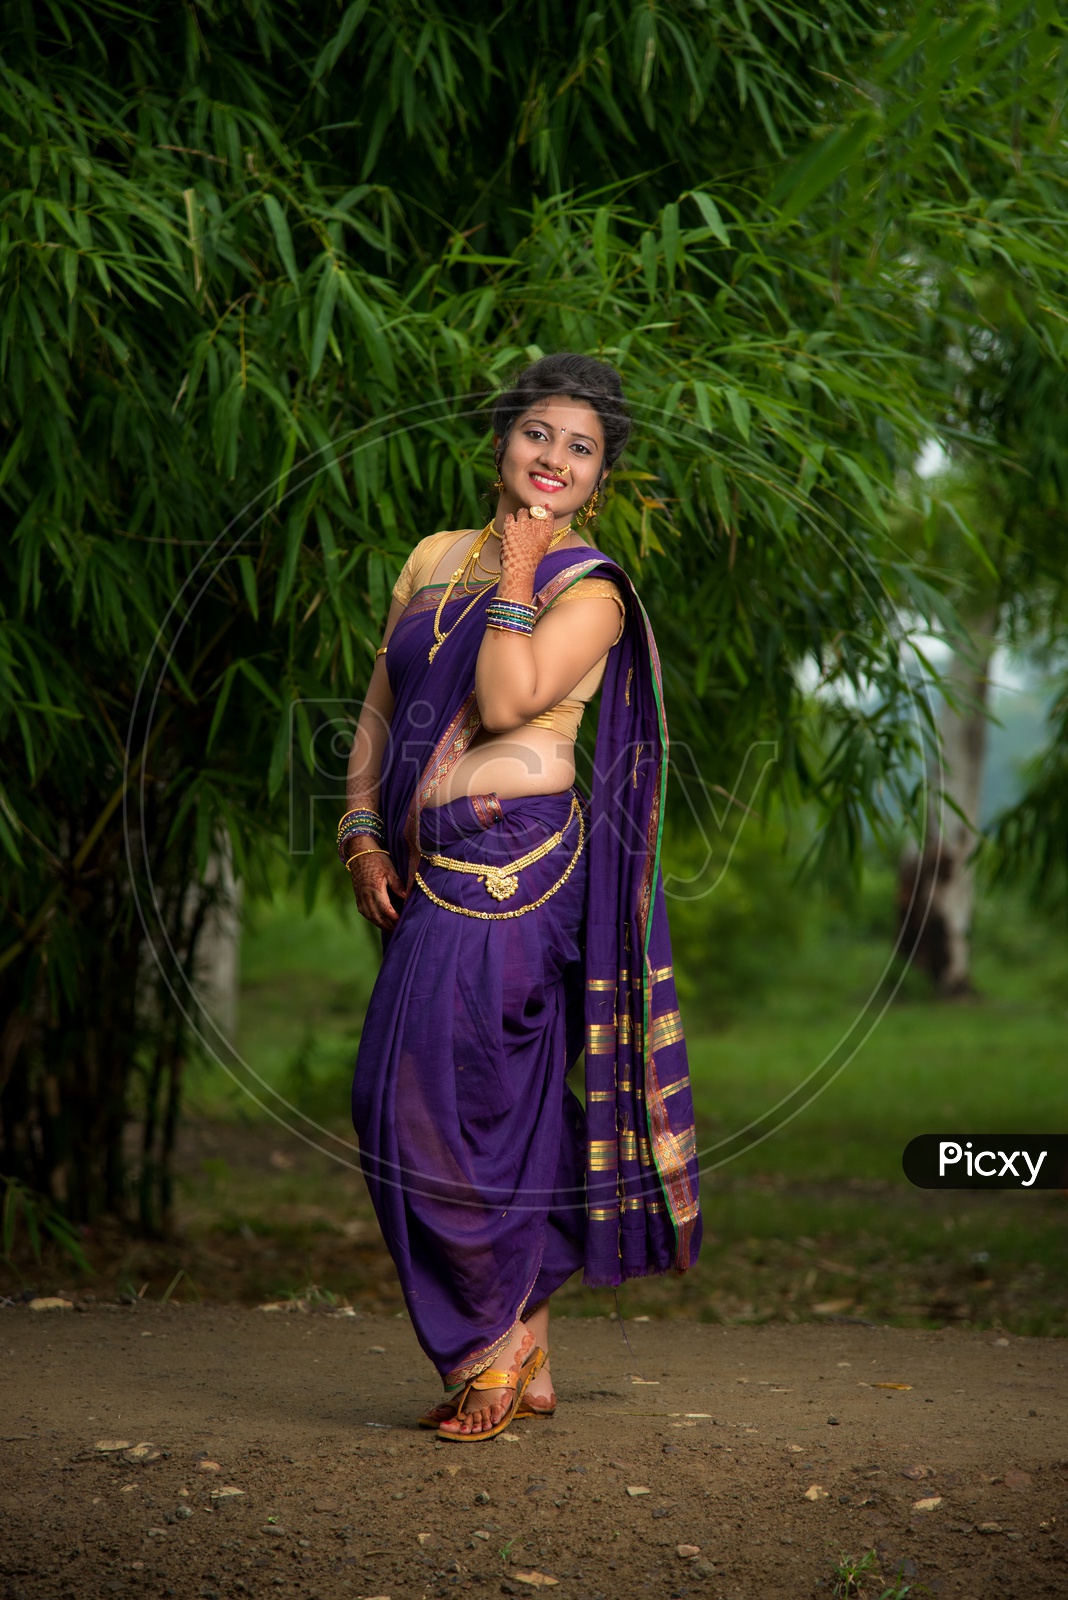 Confident Traditional Saree Poses For Photoshoot | Don't for… | Flickr-cacanhphuclong.com.vn